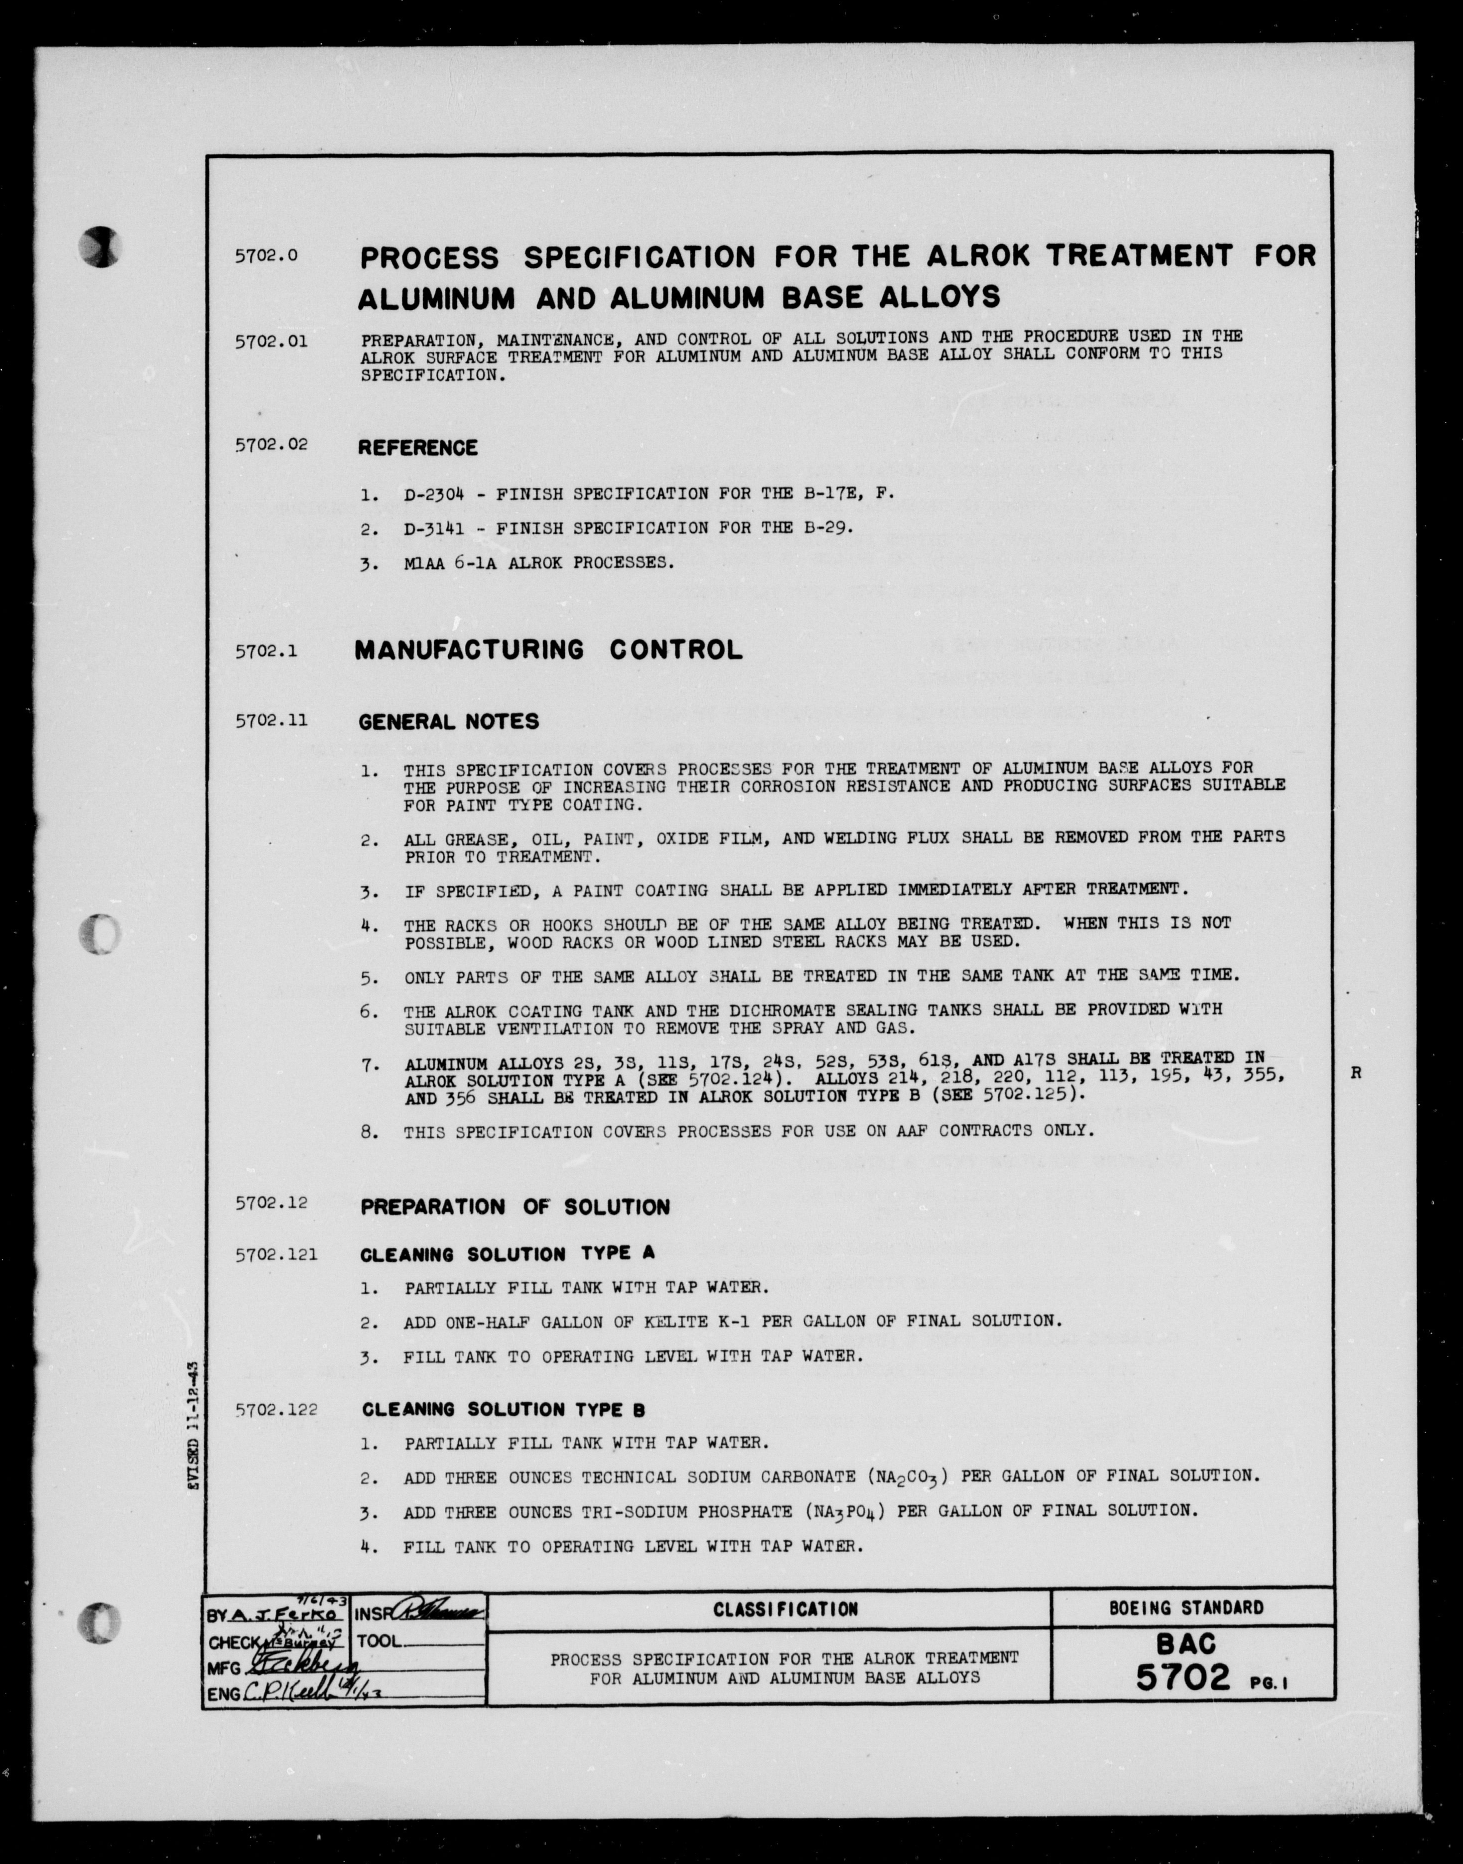 Sample page 1 from AirCorps Library document: Alrok Treatment for Aluminum and Aluminum Base Alloys